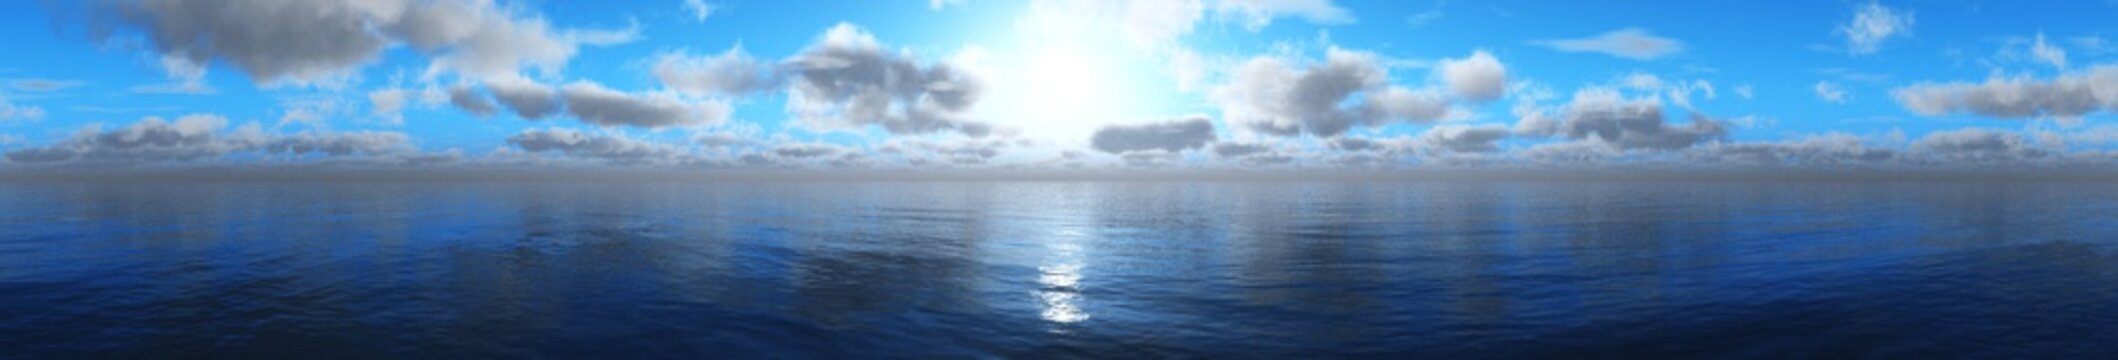 panorama of the sea landscape, sunset over the water, clouds in the sky above the ocean,
3D rendering
